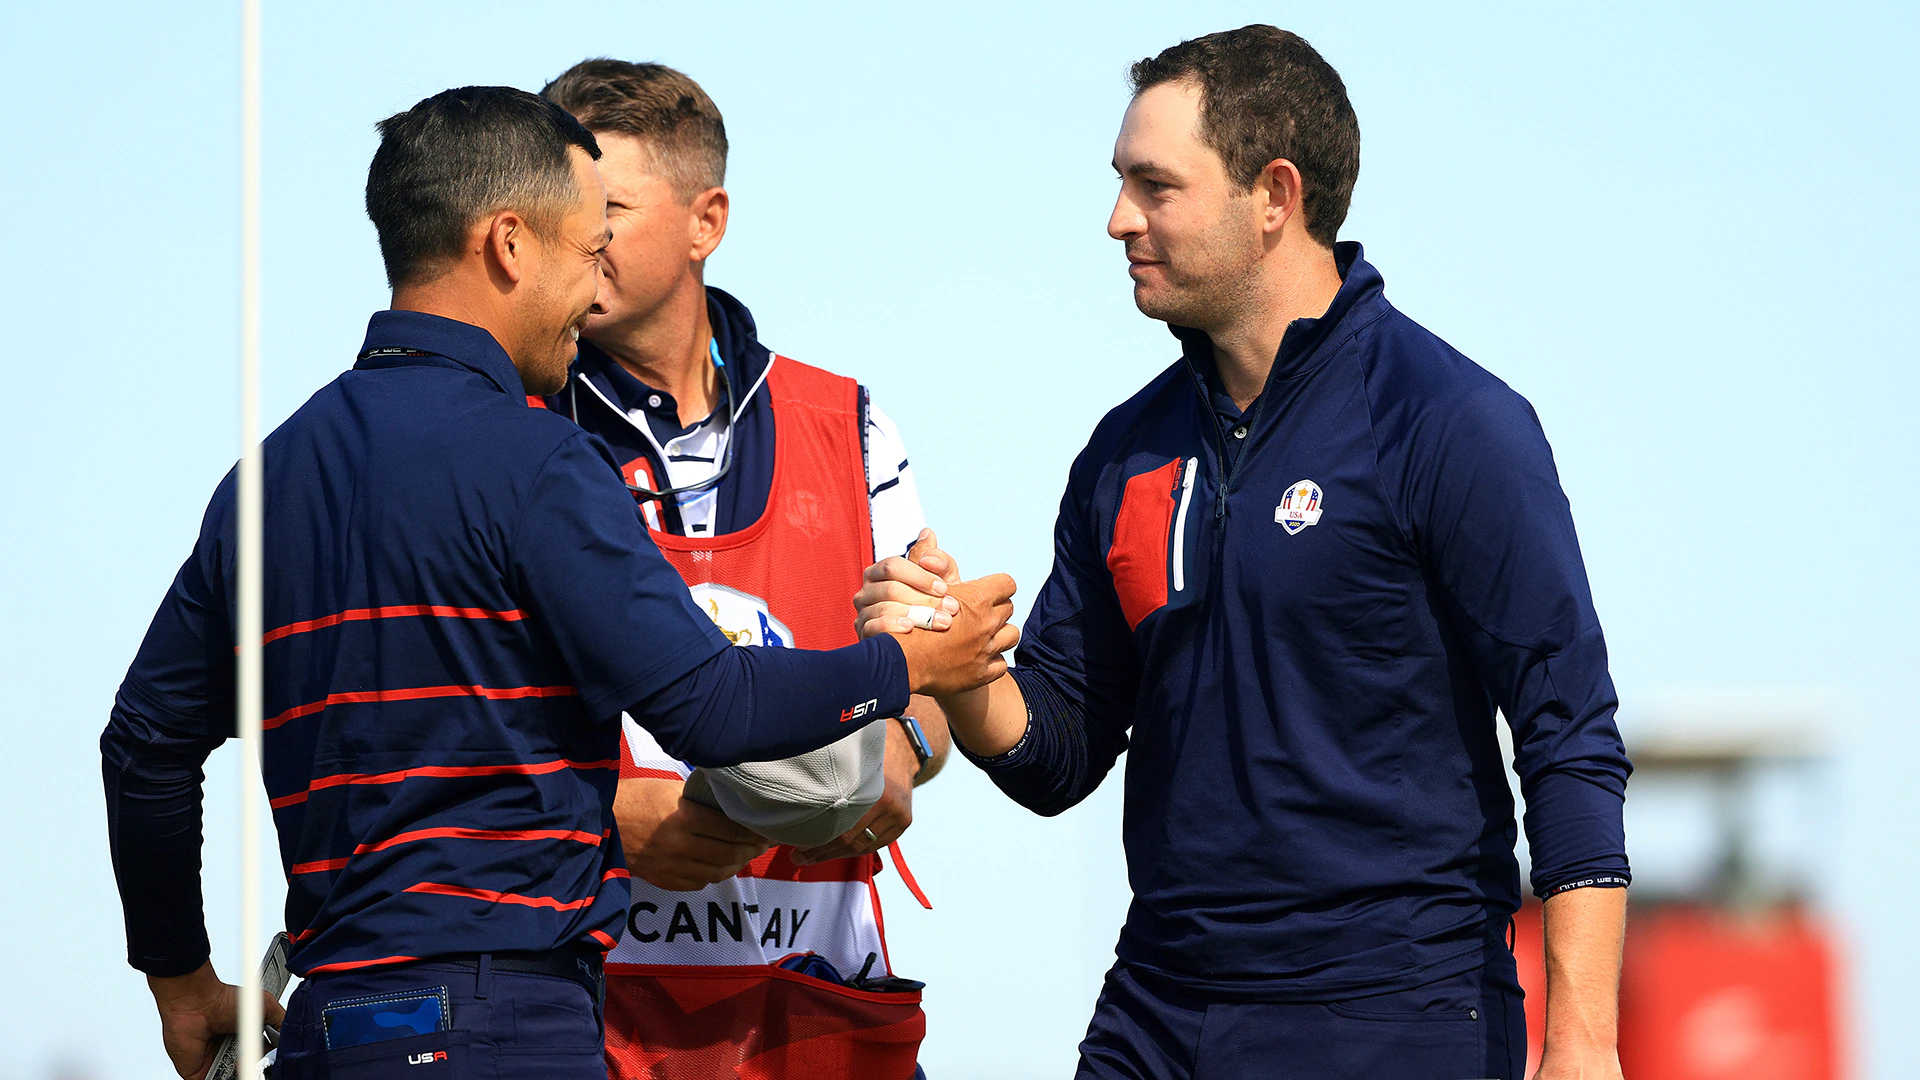 2020 Ryder Cup: Xander Schauffle-Patrick Cantlay, the new U.S. power pairing, delivers early